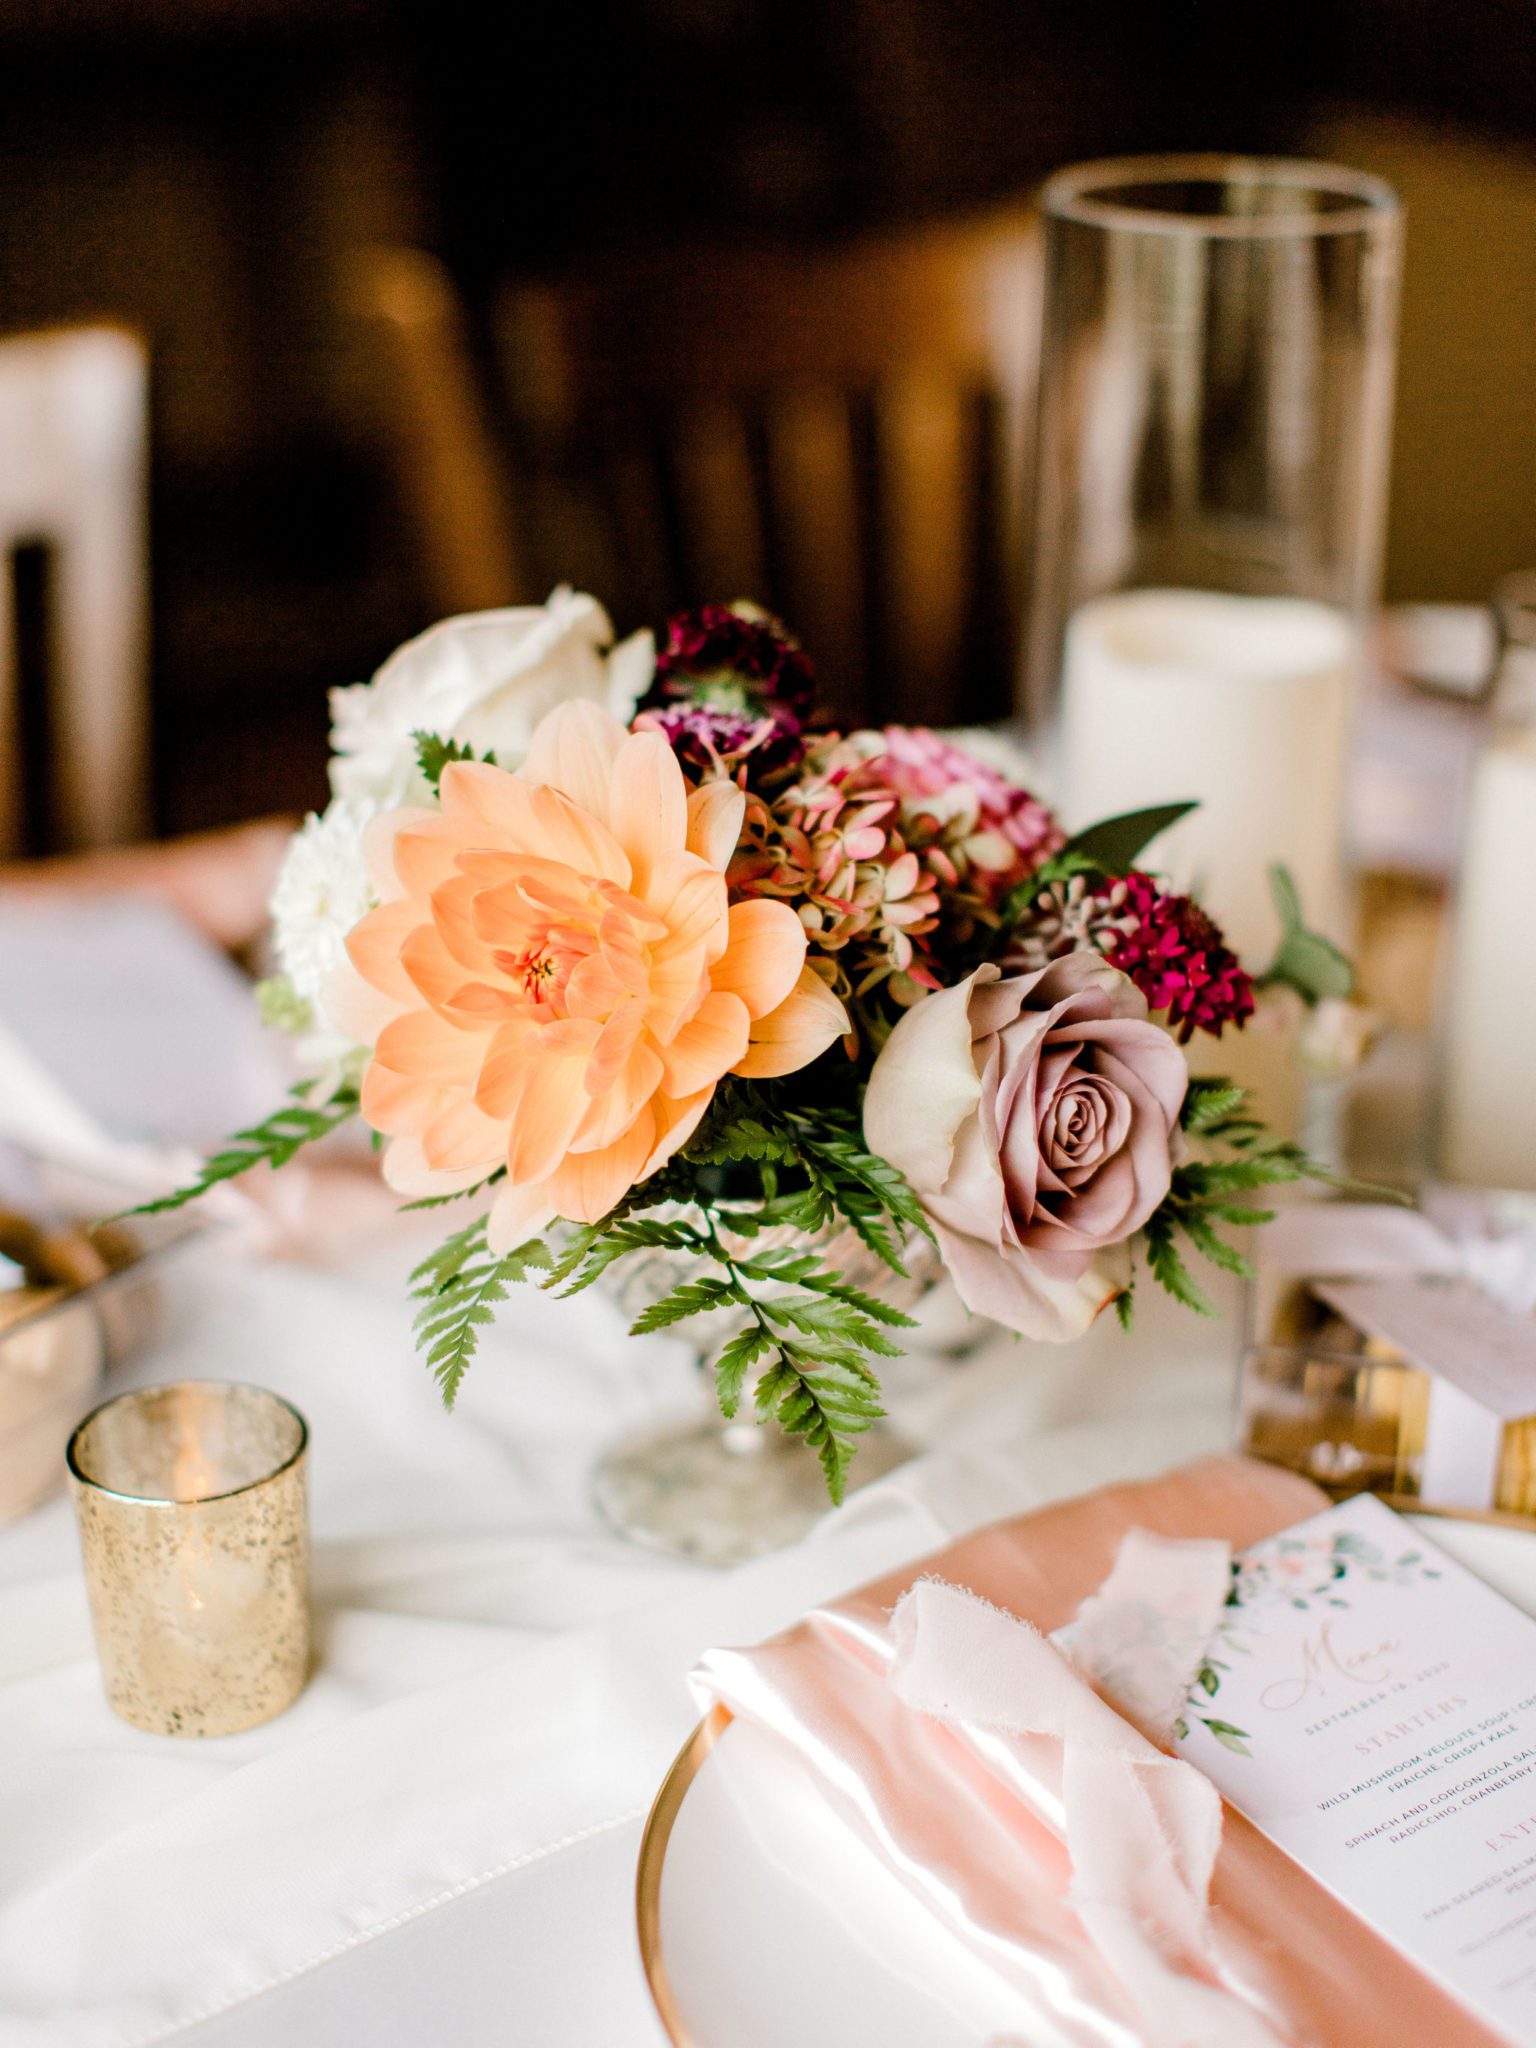 Pink, berry and tangerine table arrangements for your budget wedding reception